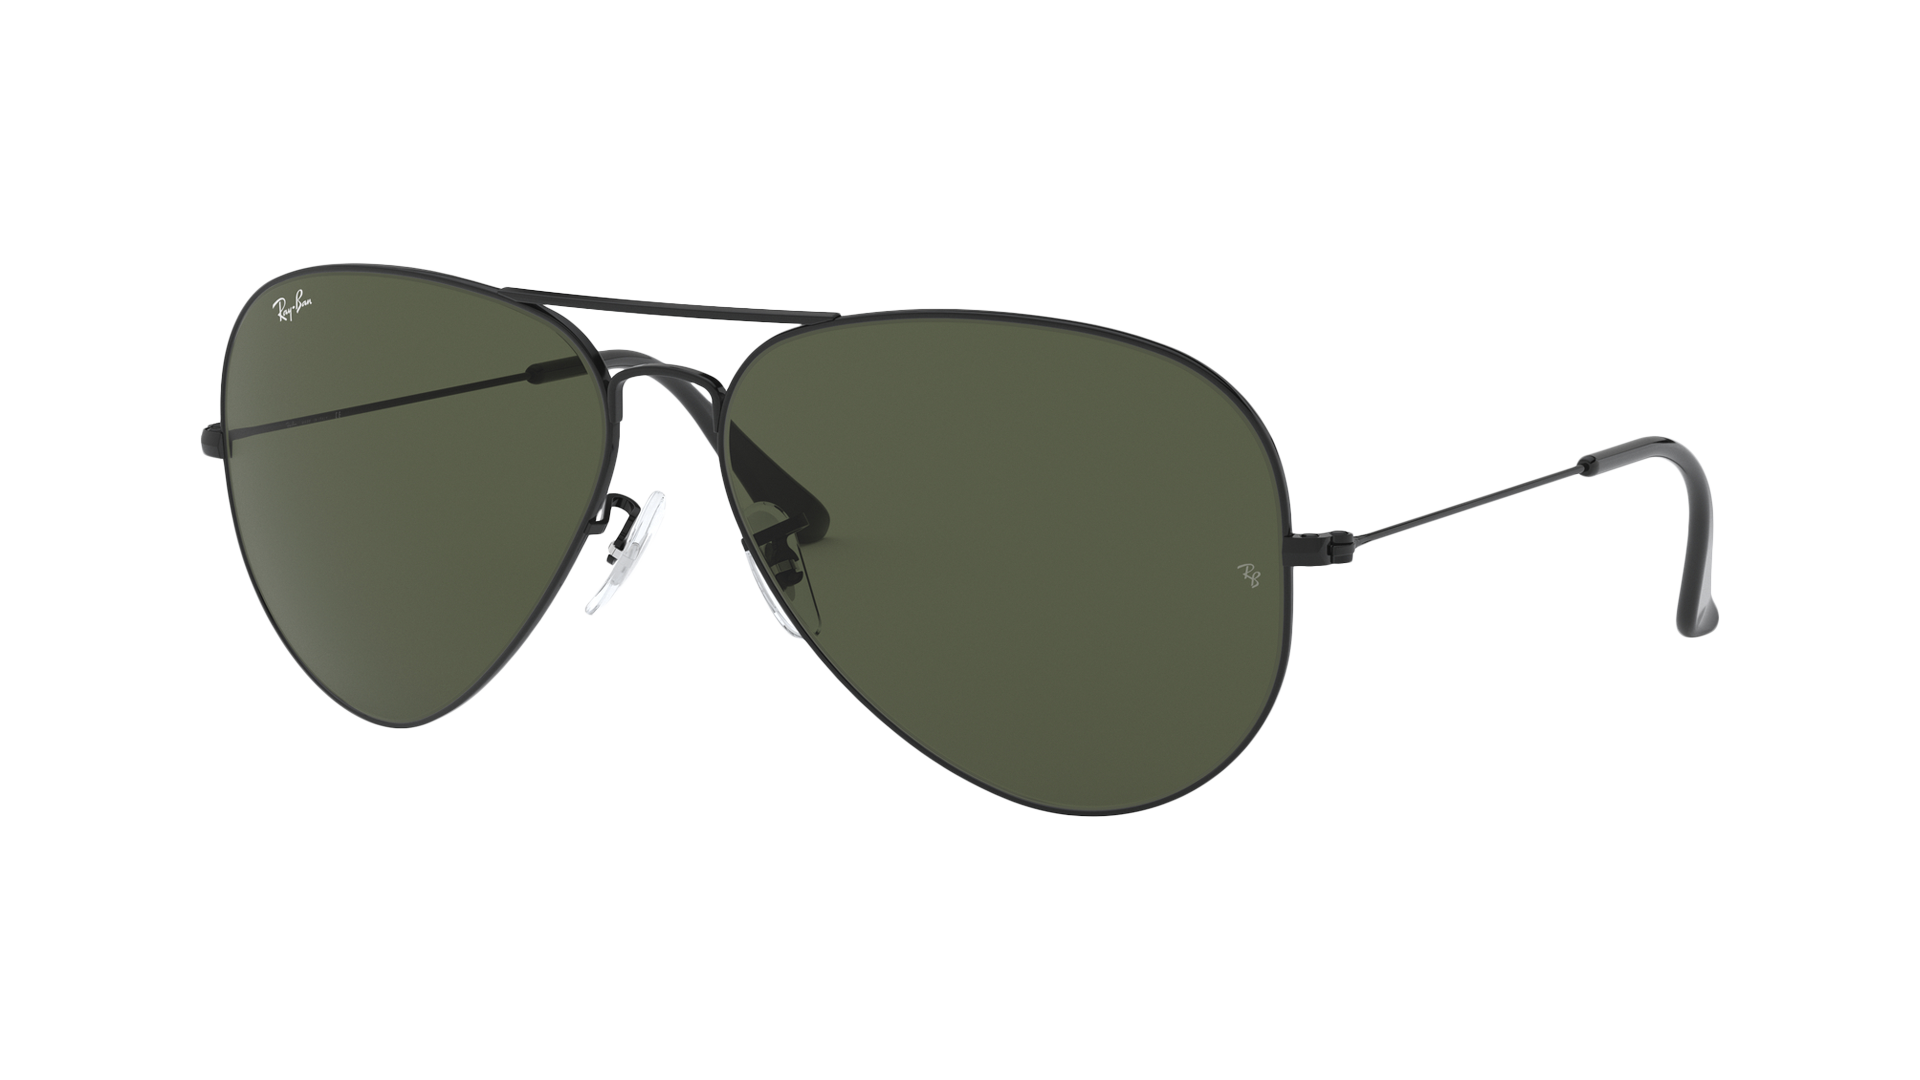 Ray-Ban Aviator Size Guide: Which Is Your Perfect Fit? | SportRx